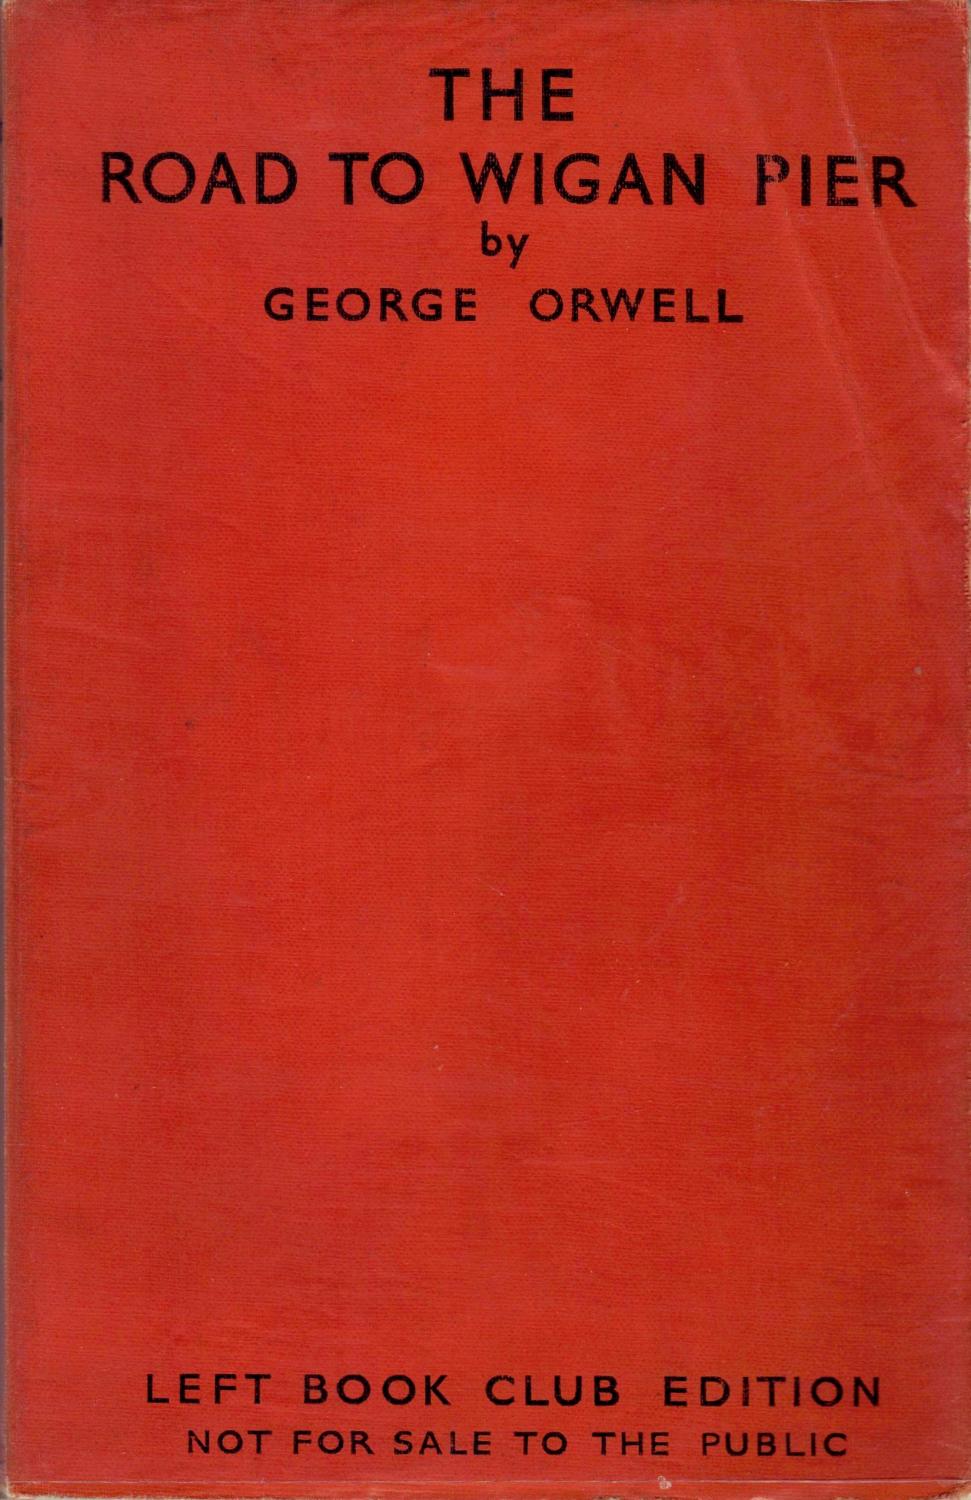 The Road to Wigan Pier - Orwell (Left Book Club/Victor Gollancz) (image)